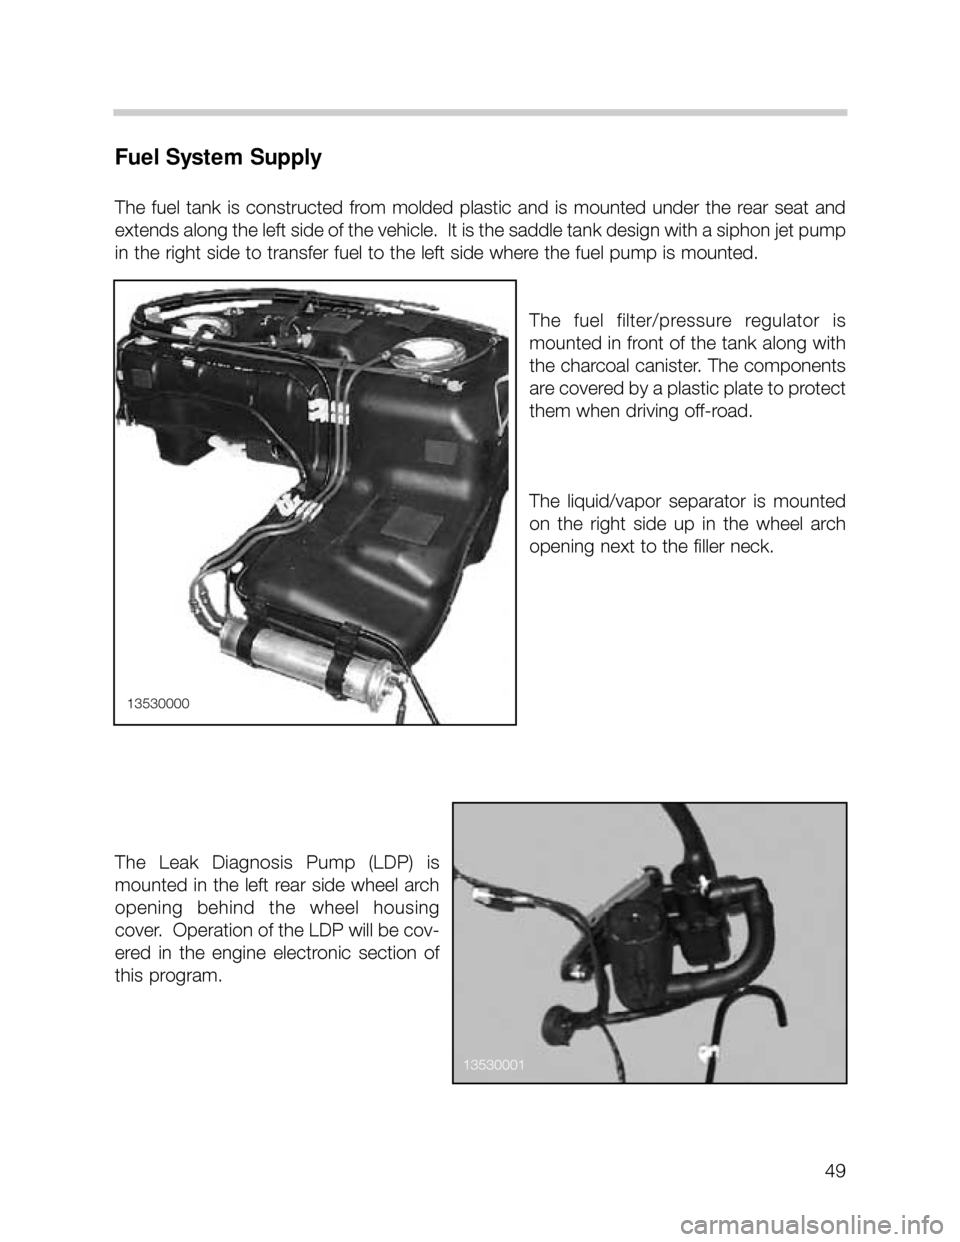 BMW X5 2001 E53 Workshop Manual 49
Fuel System Supply
The  fuel  tank  is  constructed  from  molded  plastic  and  is  mounted  under  the  rear  seat  and
extends along the left side of the vehicle.  It is the saddle tank design w